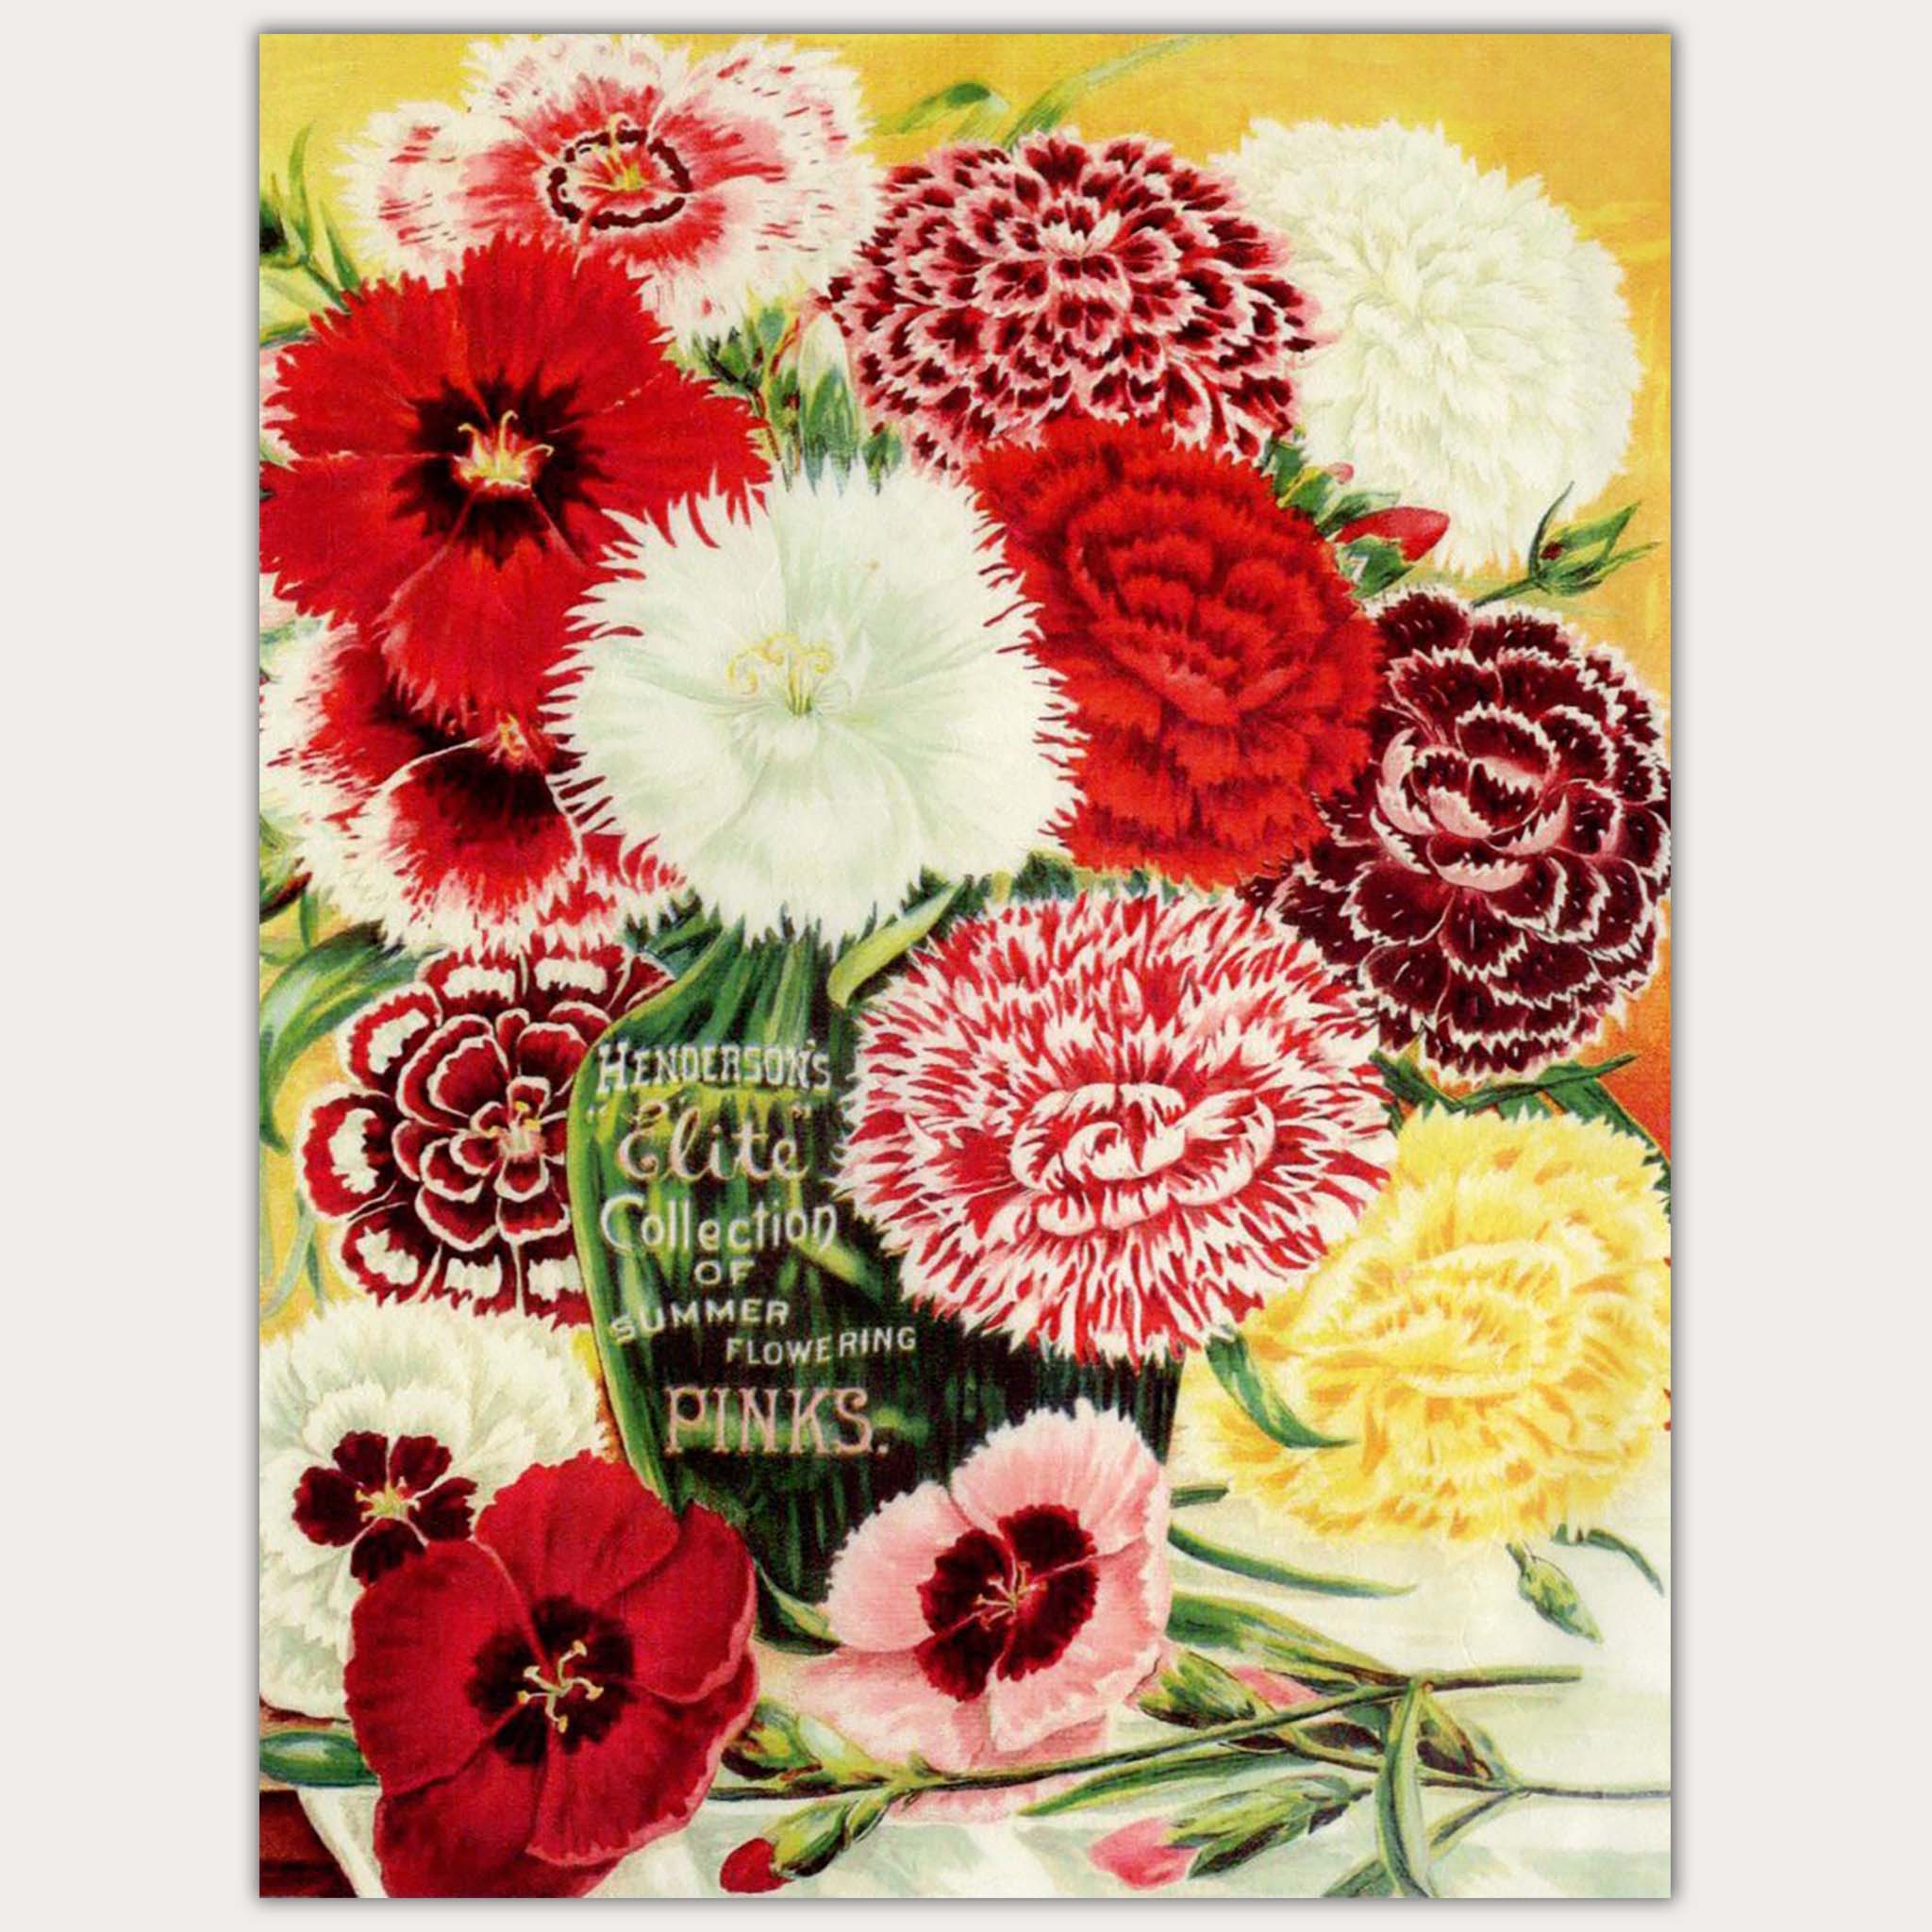 A4 rice paper design that features a vibrant bouquet of flowers beautifully printed on a vintage magazine. White borders on the sides.